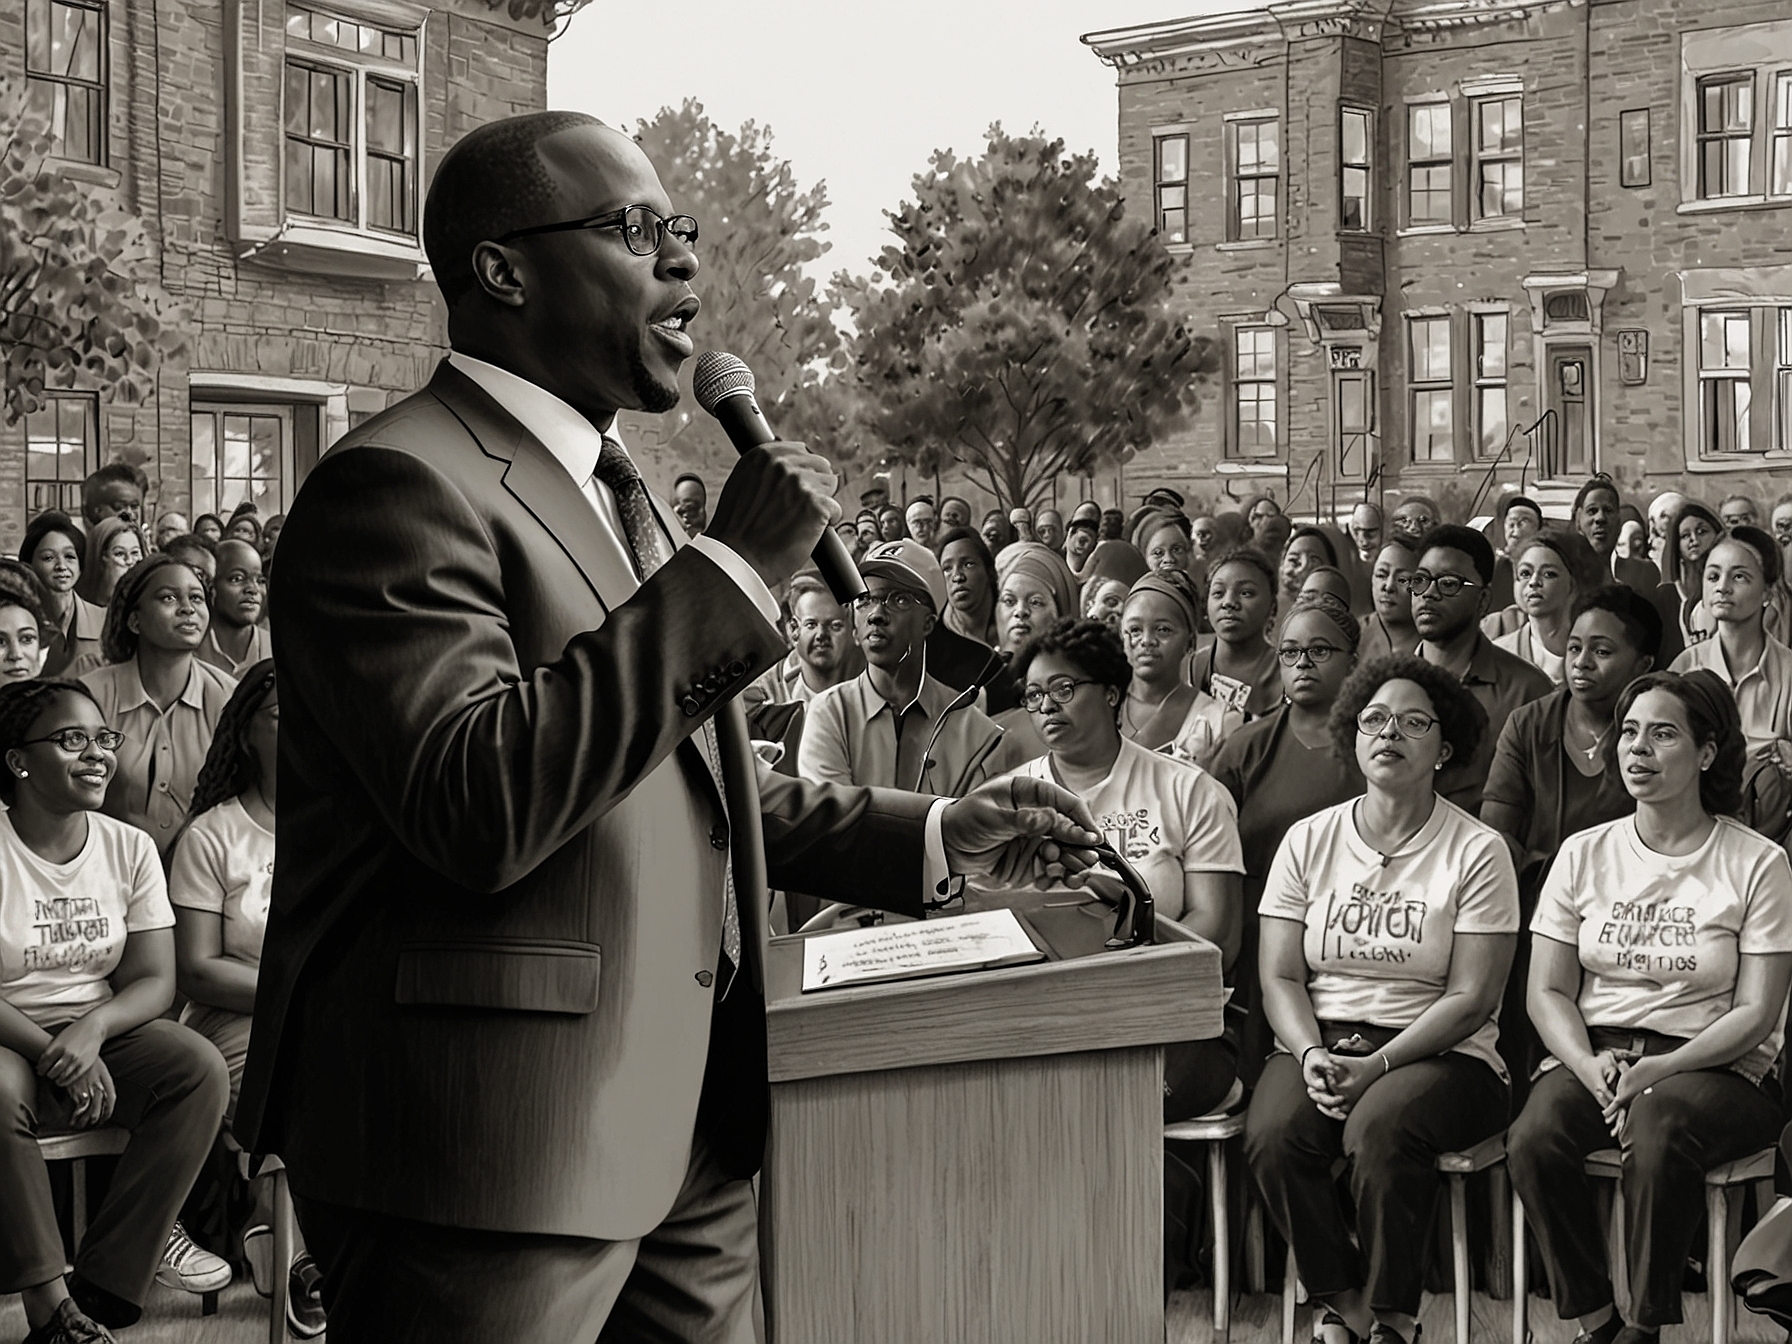 Rep. Jamaal Bowman speaking at a community event, emphasizing his progressive policies on education reform, climate justice, and police reform to a crowd of enthusiastic supporters.